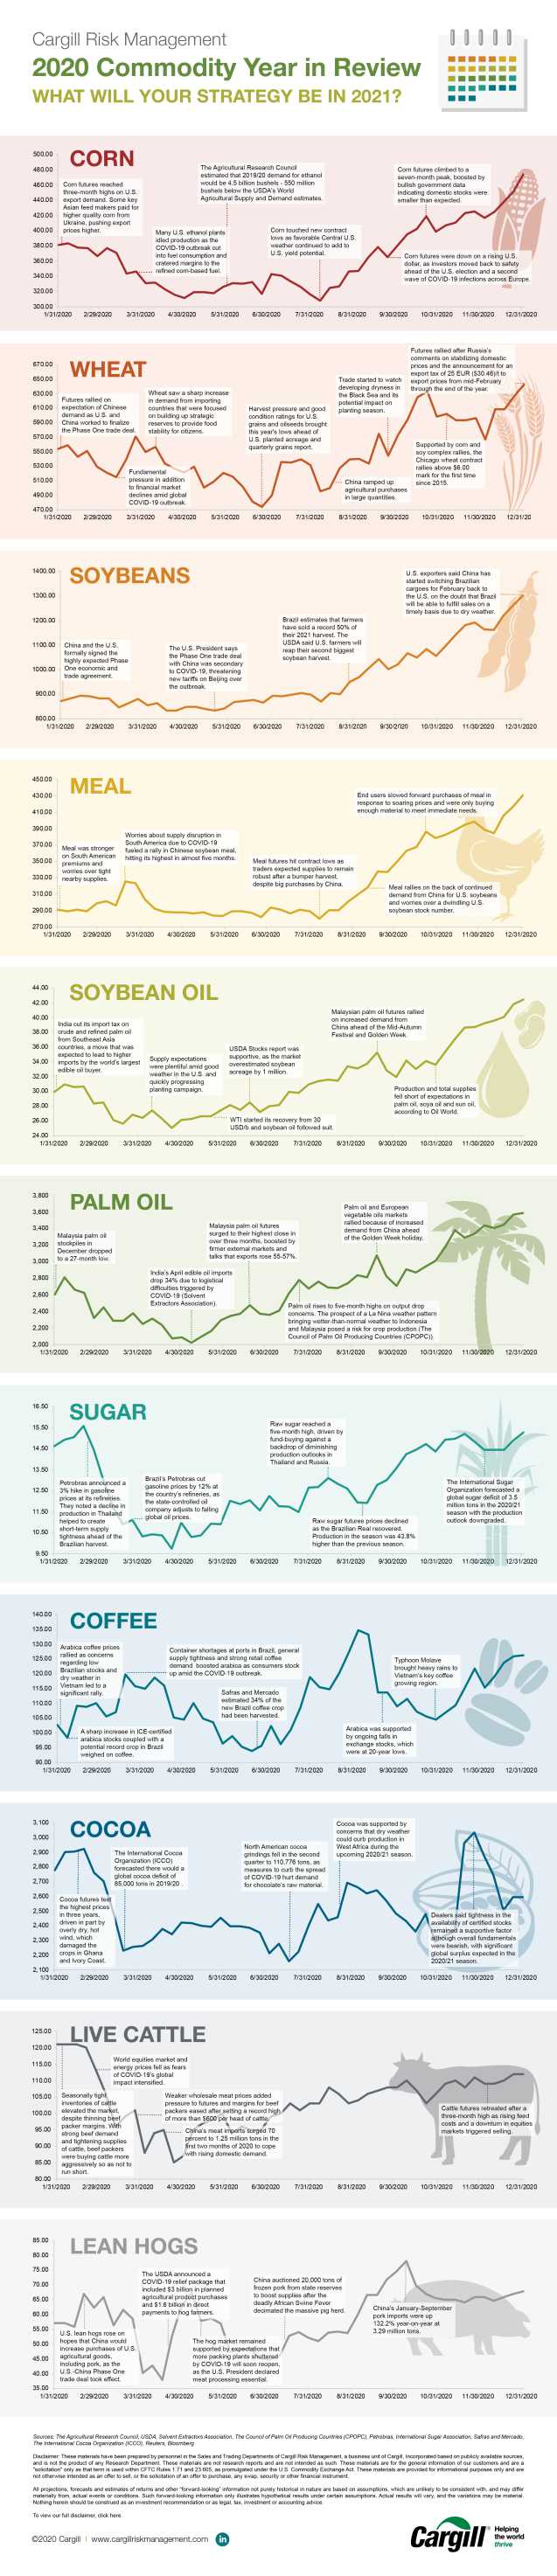 2020 commodity year in review infographic 